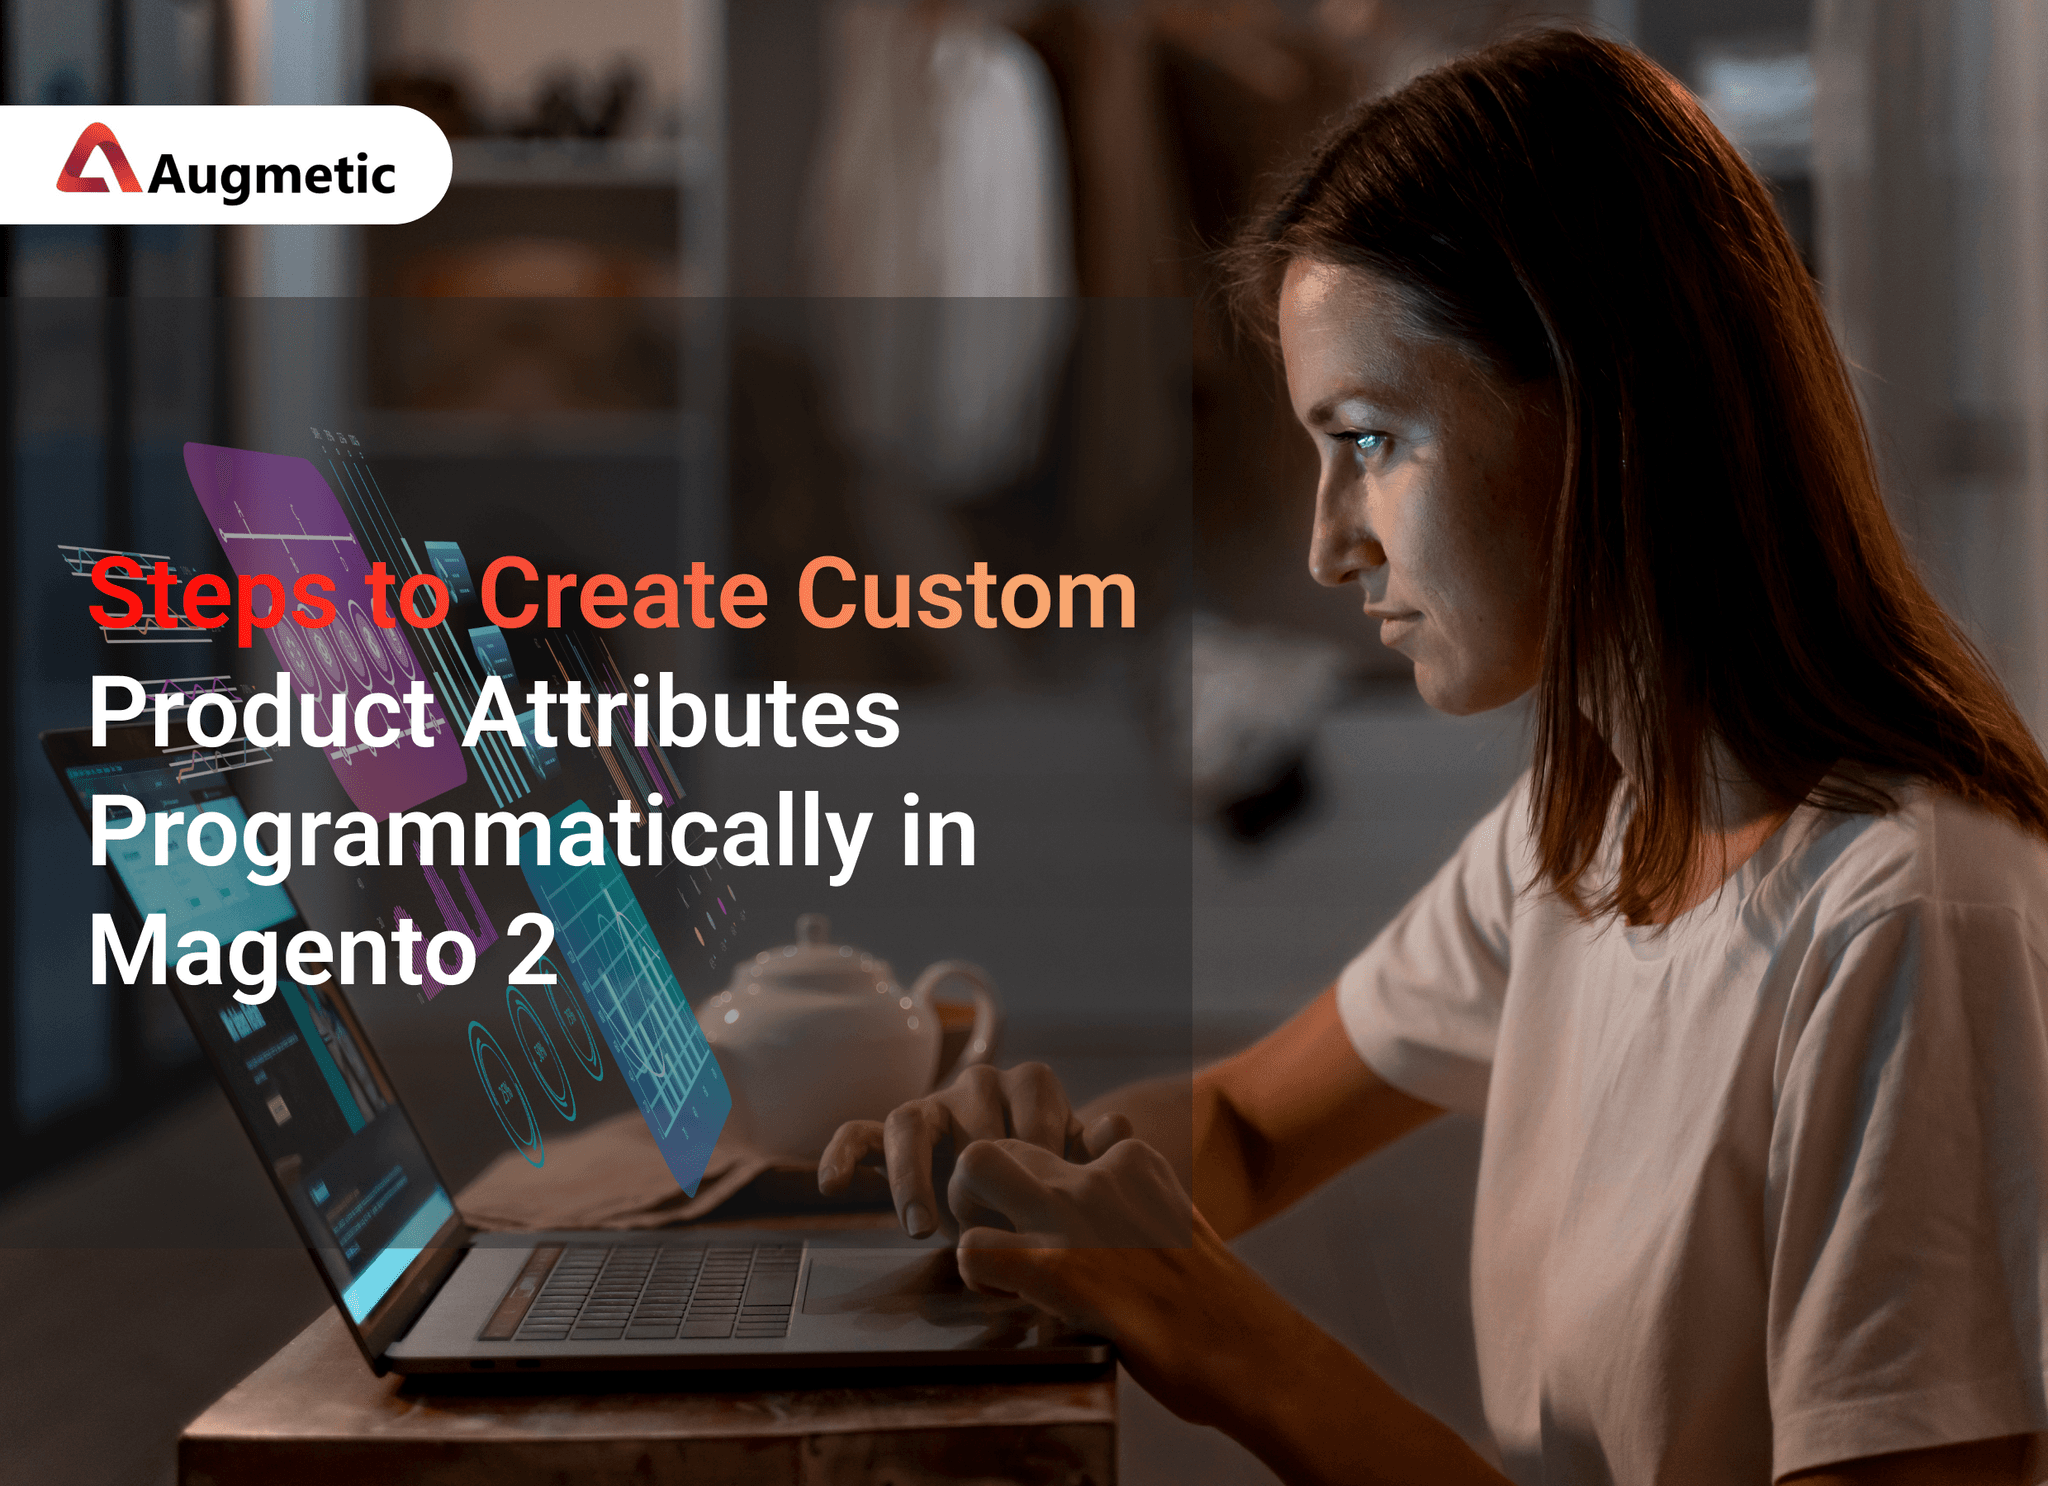 Steps to Create Custom Product Attributes Programmatically in Magento 2